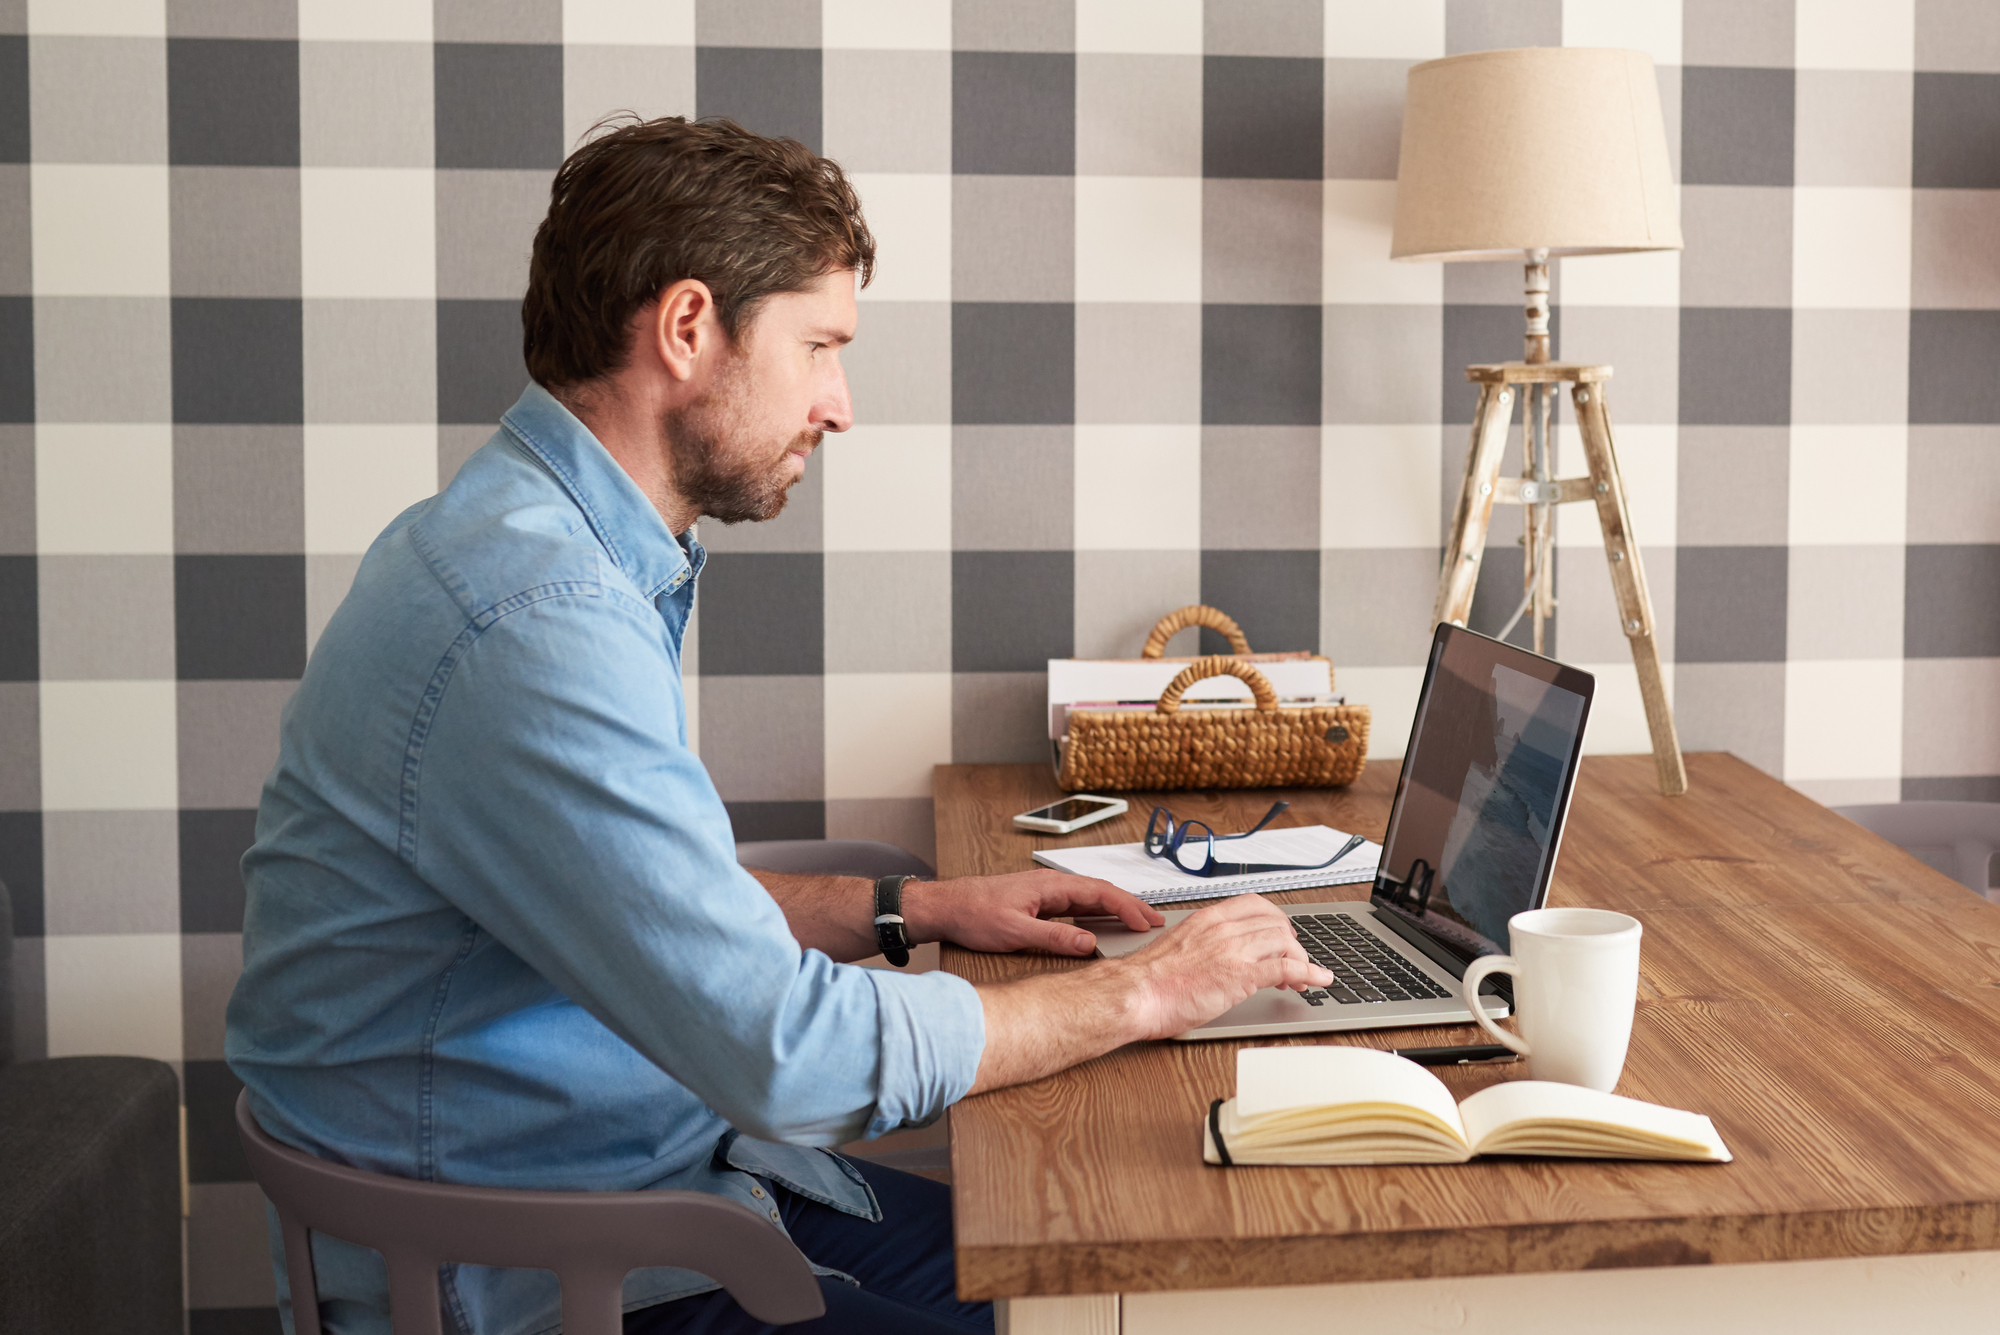 Preparing Your Business for Working From Home